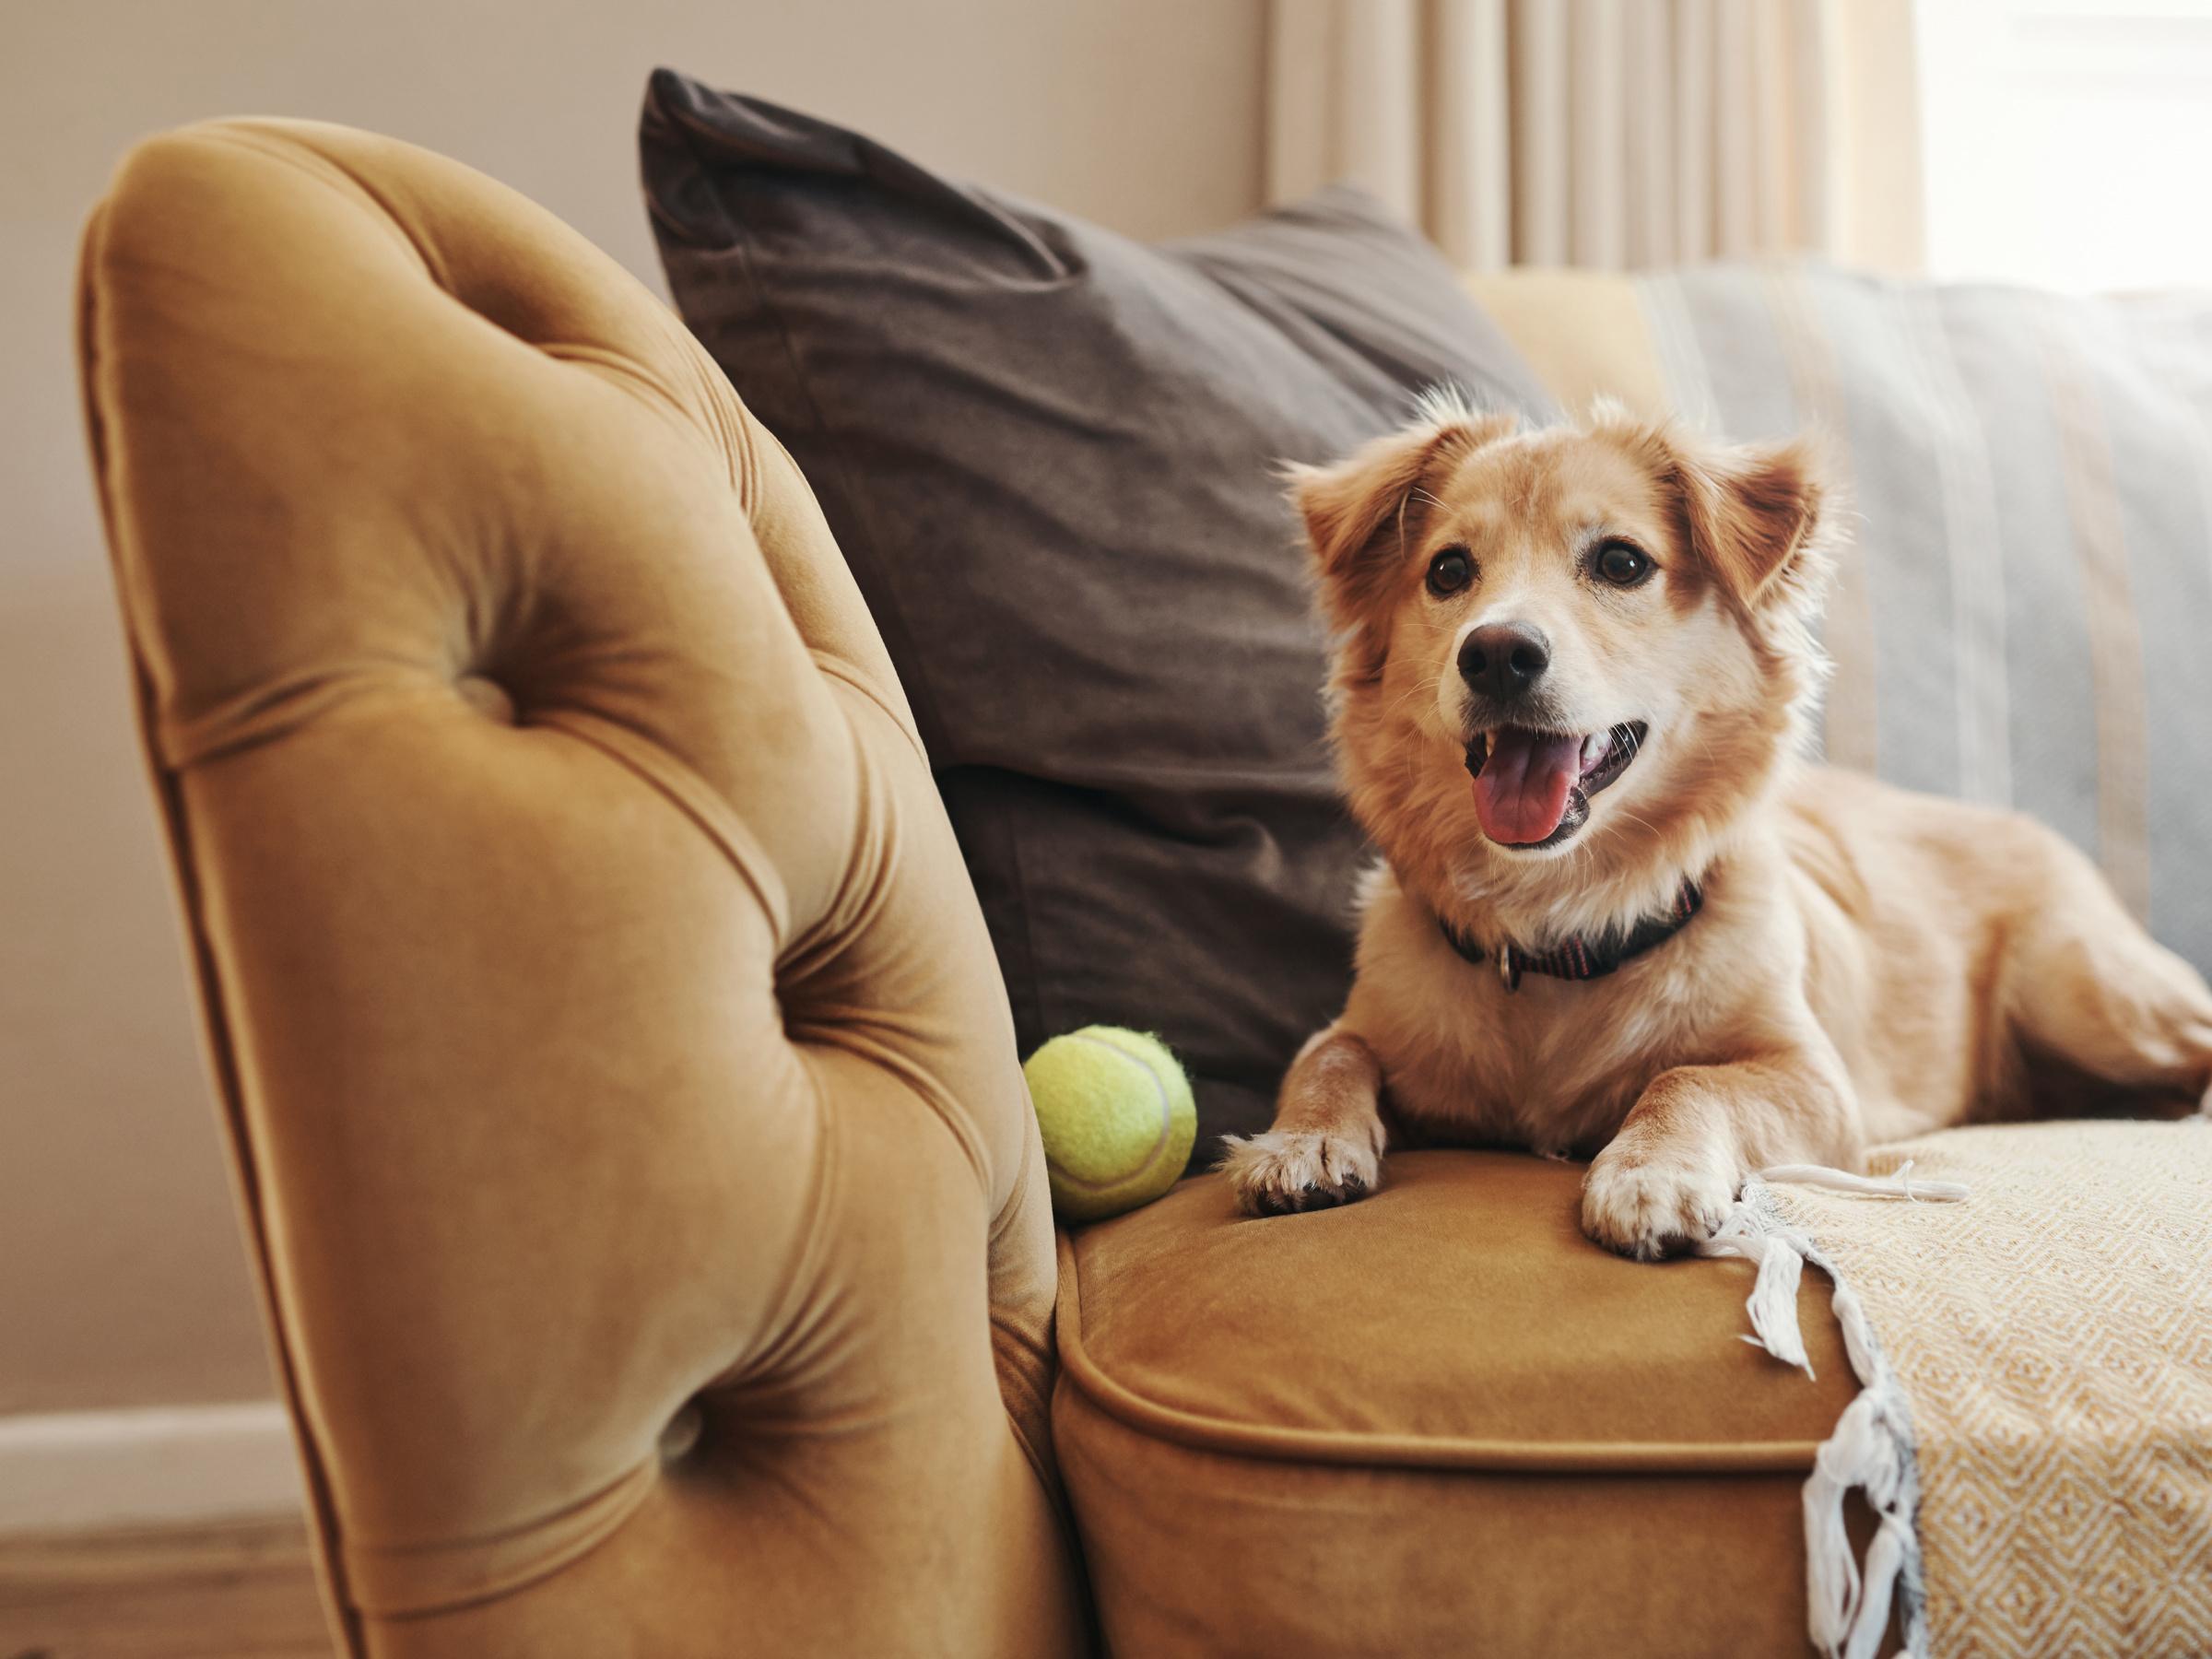 Find answers to our most frequently asked questions about dog owners insurance